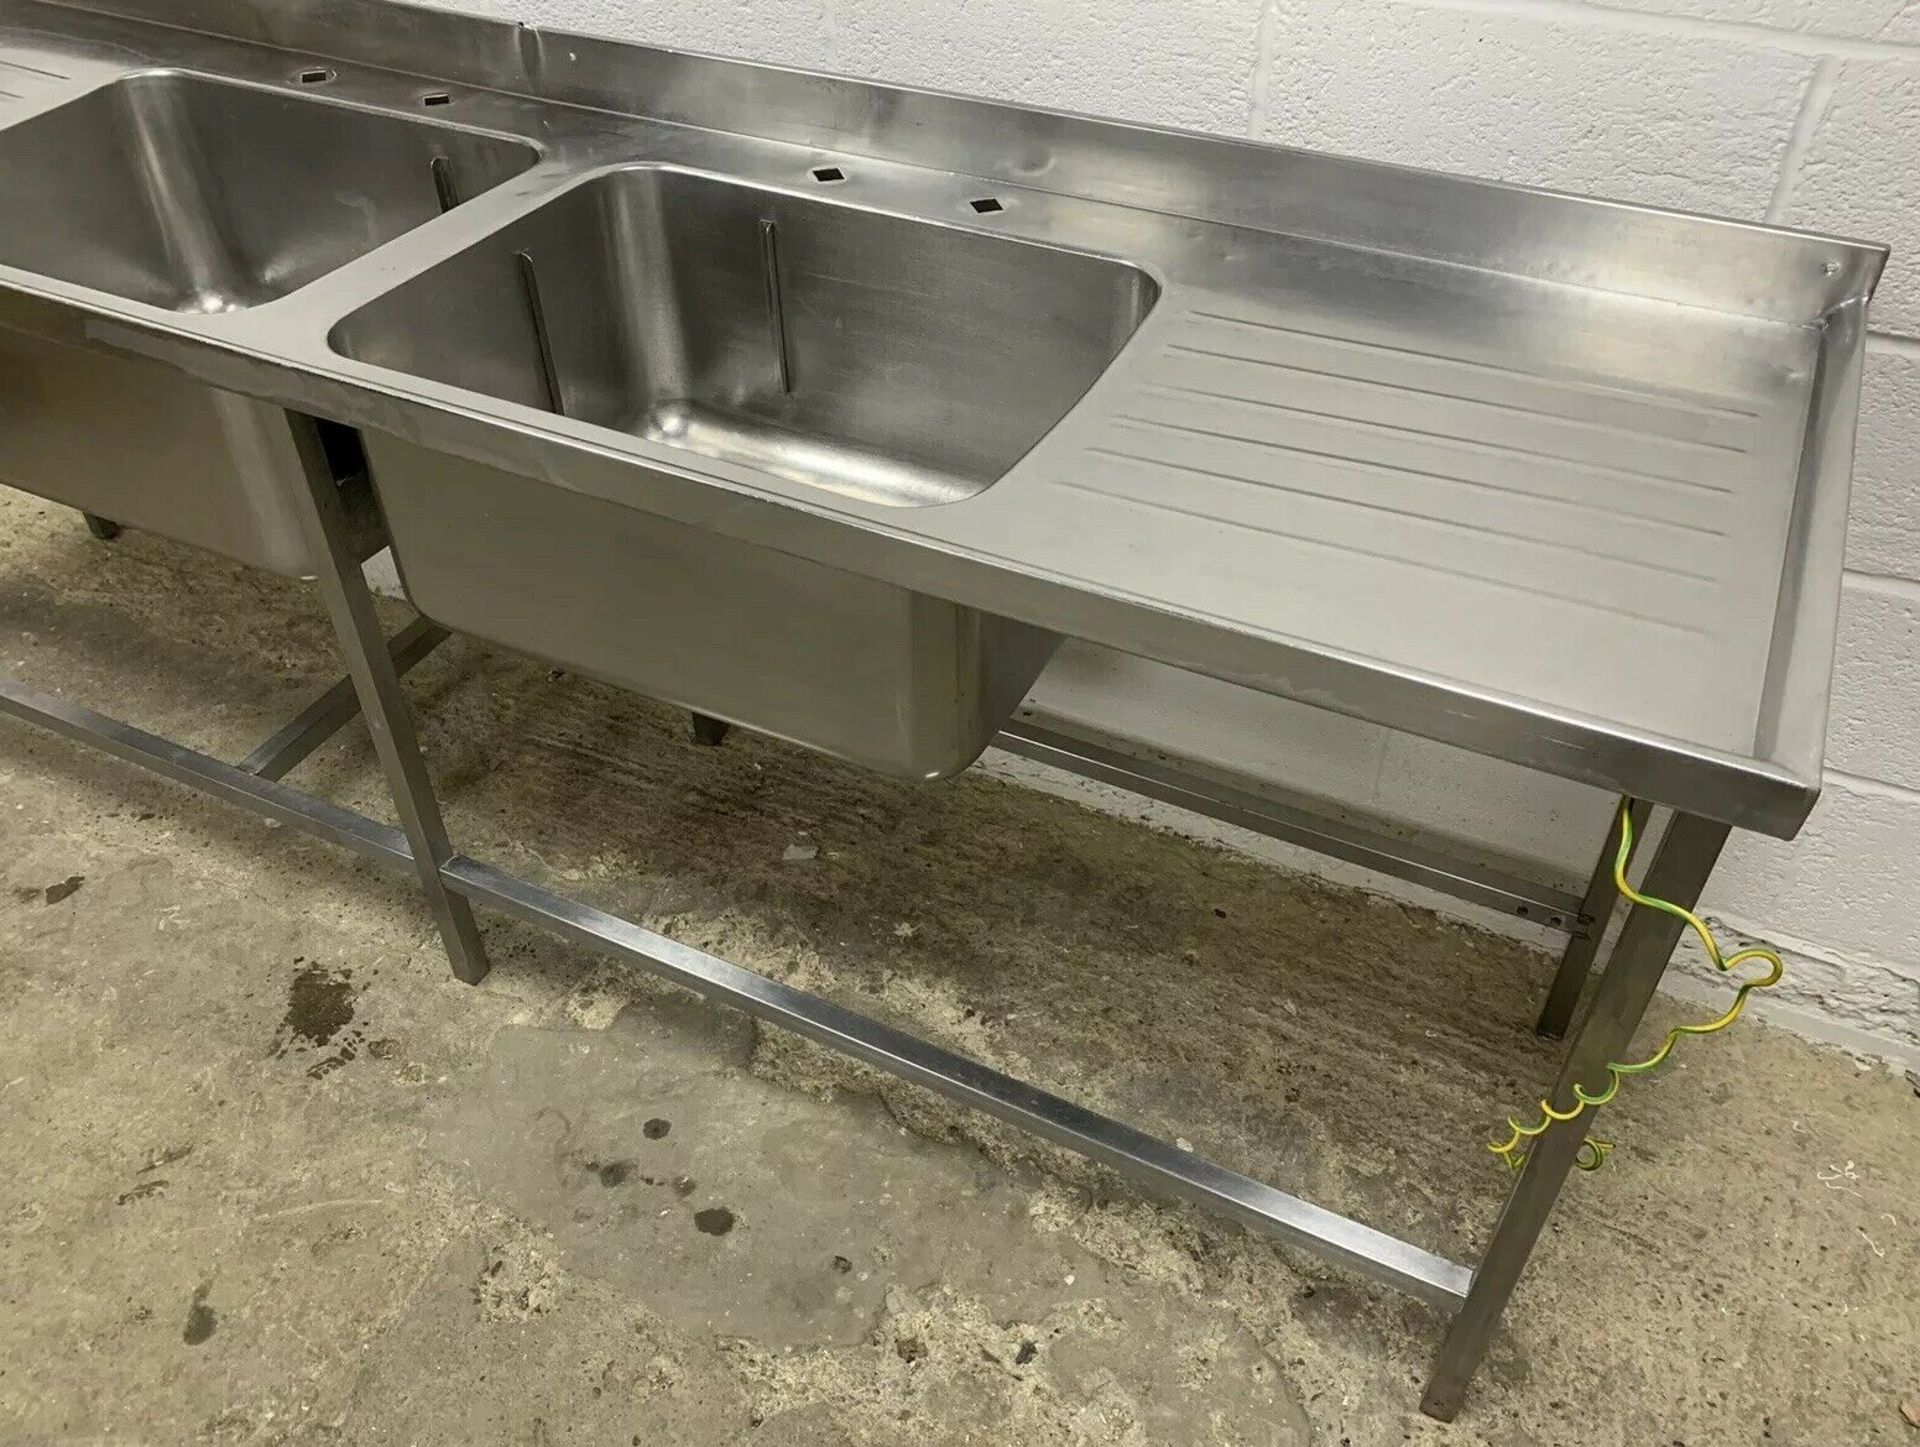 STAINLESS STEEL DOUBLE BOWL SINK WITH DOUBLE DRAINER - Image 2 of 3